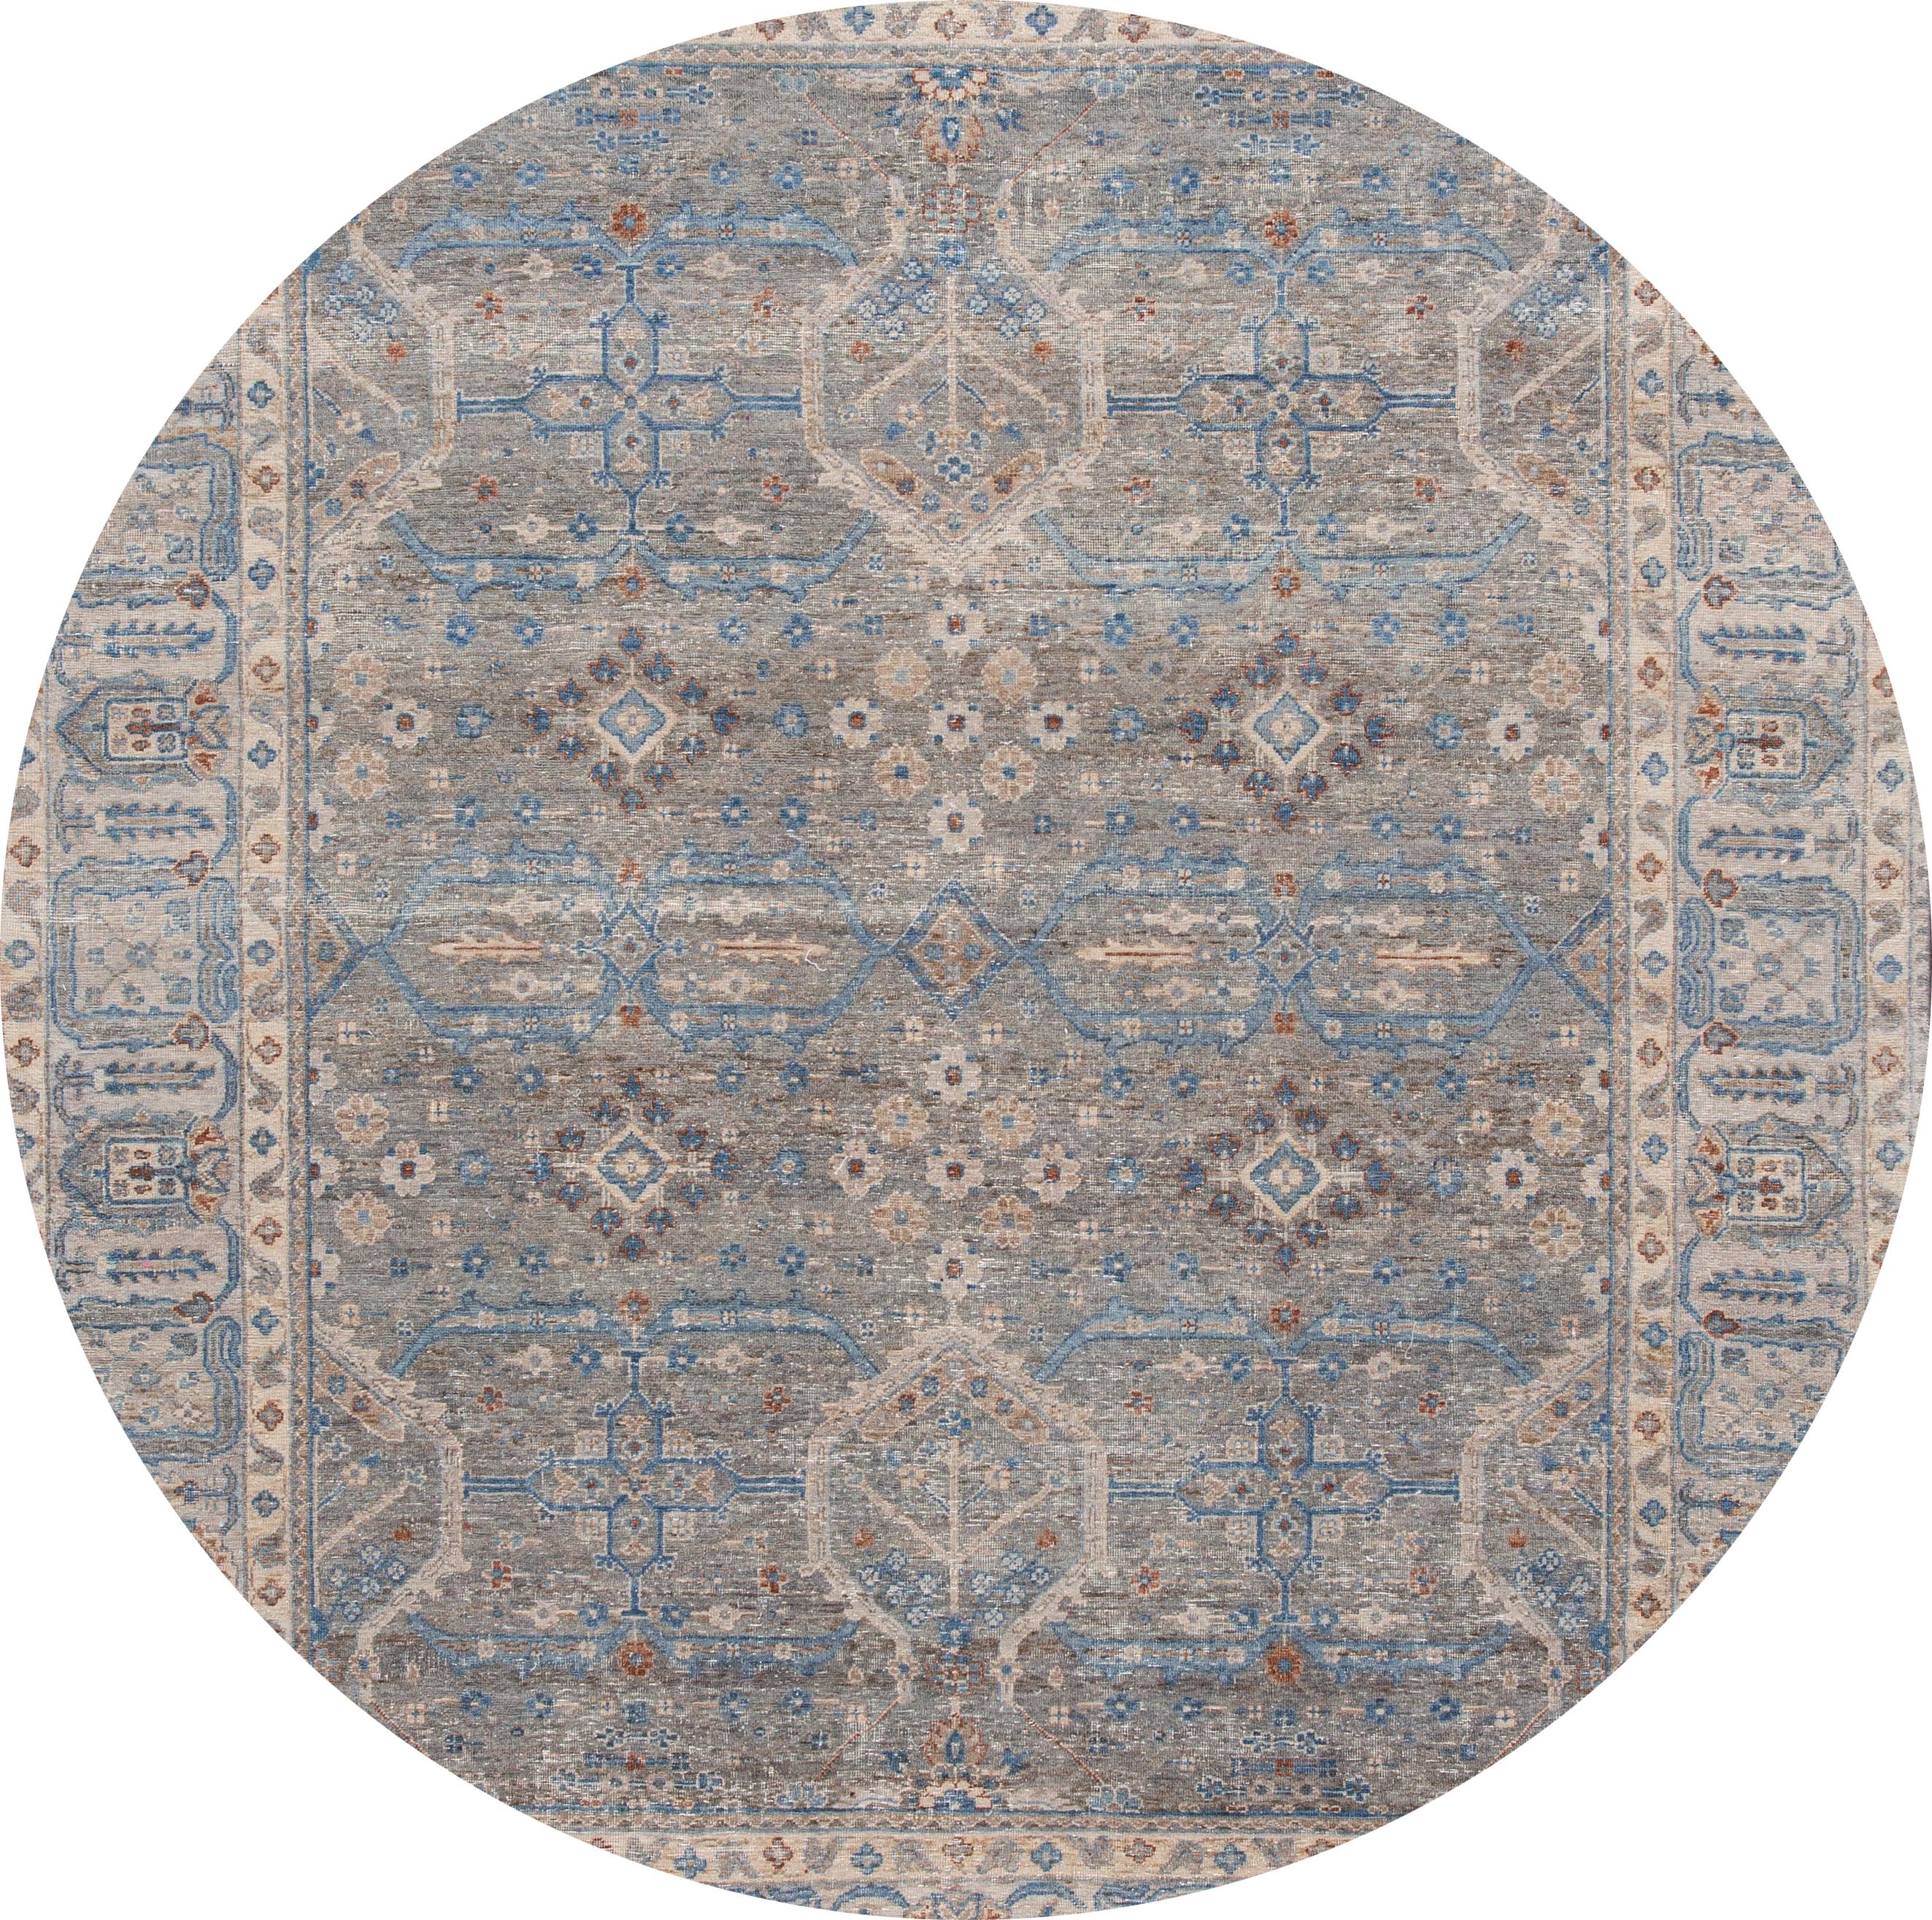 Beautiful modern hand knotted Indian wool rug with a gray field, blue, brown, and ivory accents with an all-over geometric design.

This rug measures 7' 10